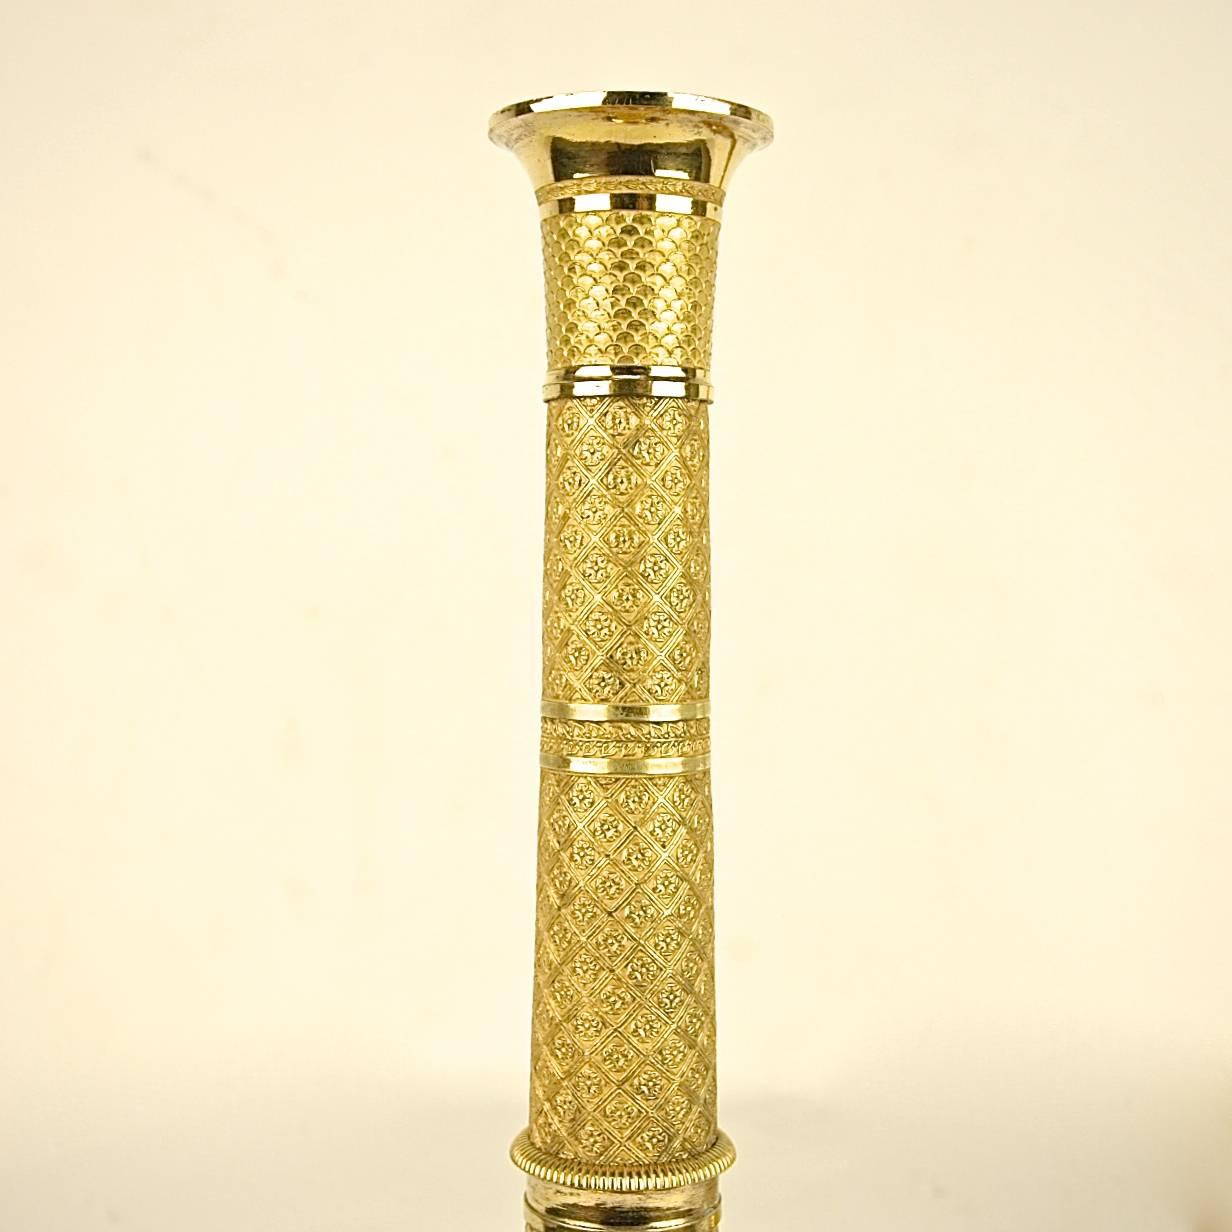 A fine pair of Empire candlesticks, each richly ornamented with fish scale ornament and intricate trellis work. Each candlestick rests on a circular base chiseled with a ring of laurels, gadrooning and trellis work. The decor is very intricately